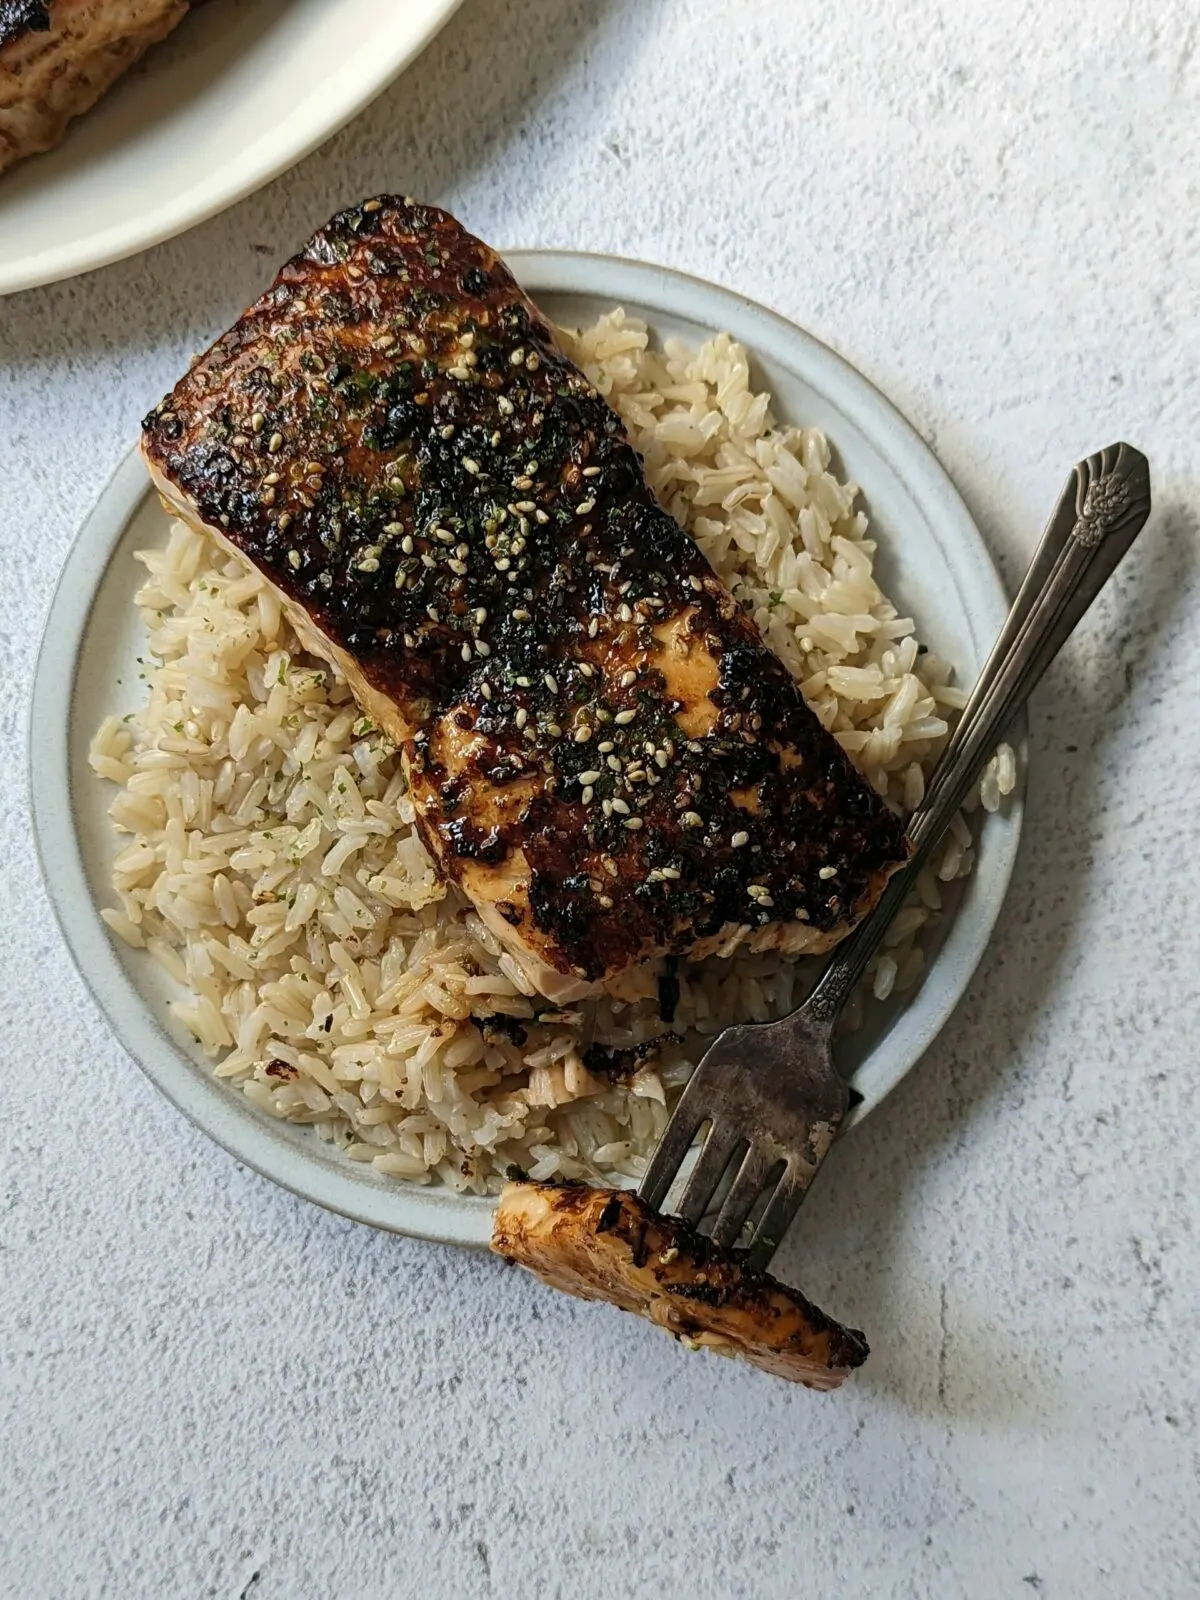 A fillet of furikake salmon cut open with a fork and served on a bed of rice.